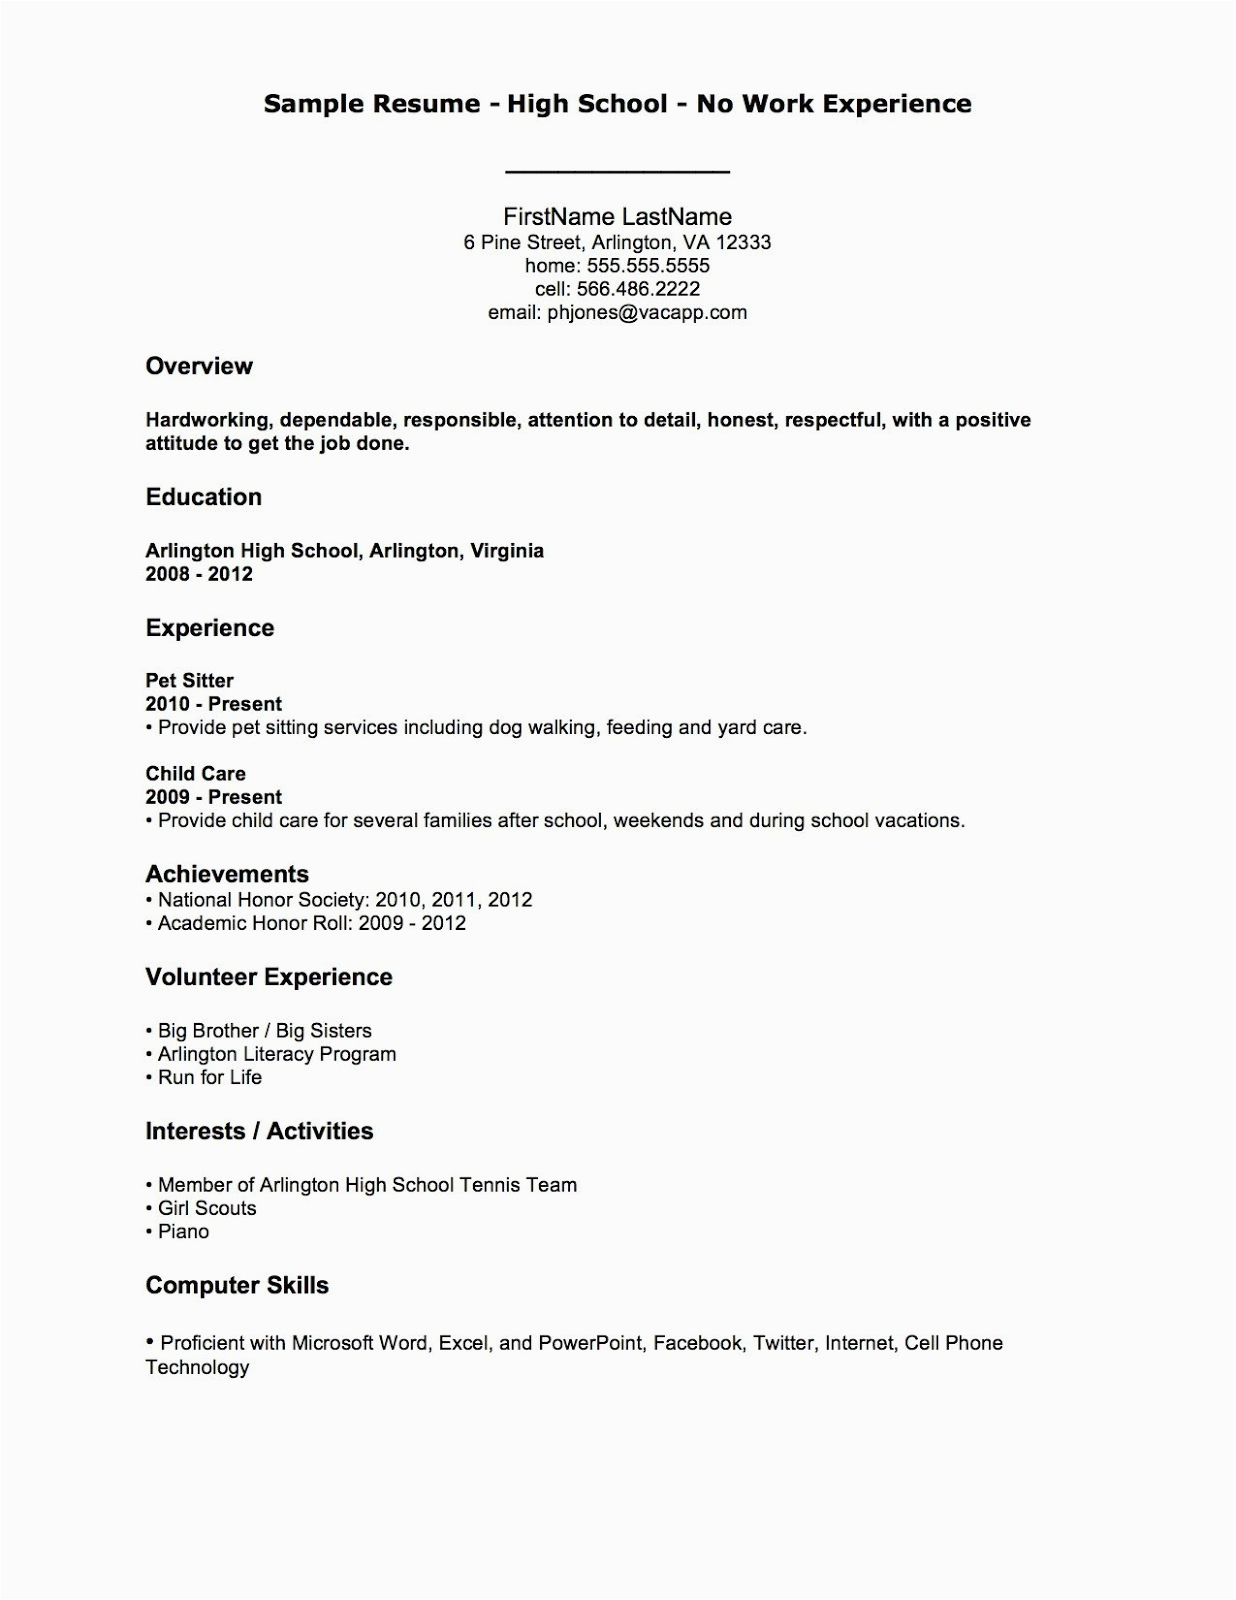 Resume Template for First Job No Experience First Job Sample Resume